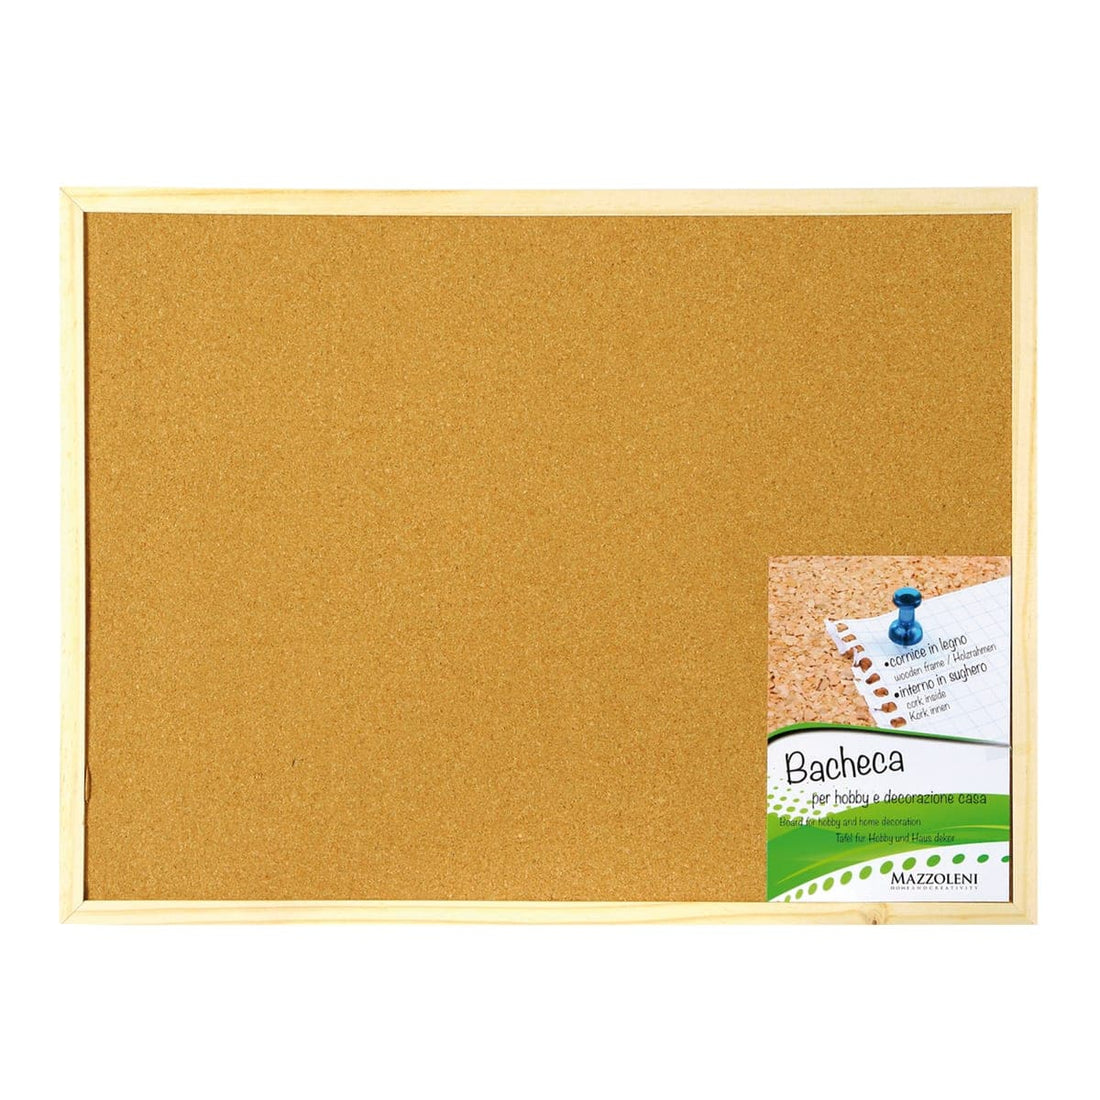 60X90 CM CORK NOTICE BOARD WITH NATURAL WOOD FRAME - best price from Maltashopper.com BR480770039